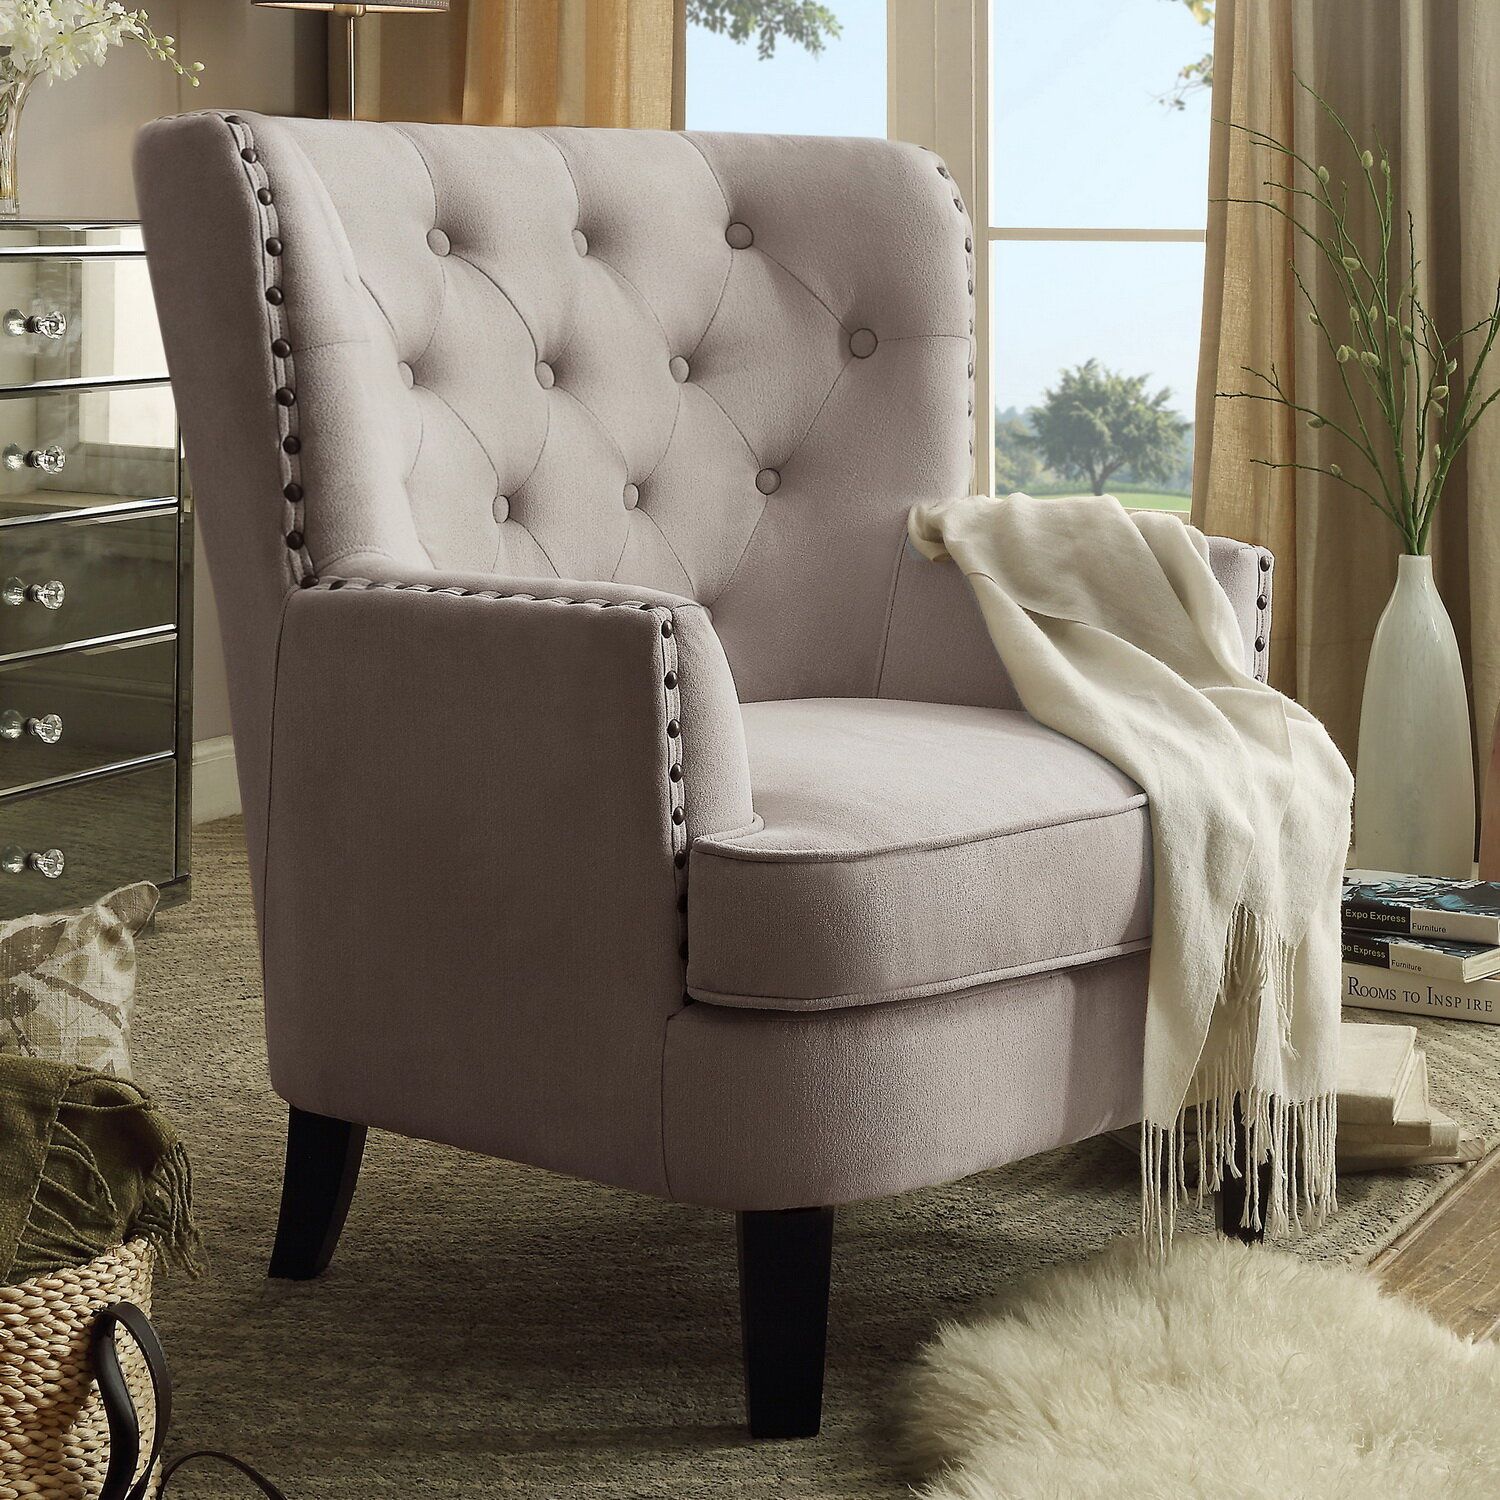 Laurel Foundry Modern Farmhouse Ivo 30" W Tufted Wingback Throughout Galesville Tufted Polyester Wingback Chairs (View 9 of 15)